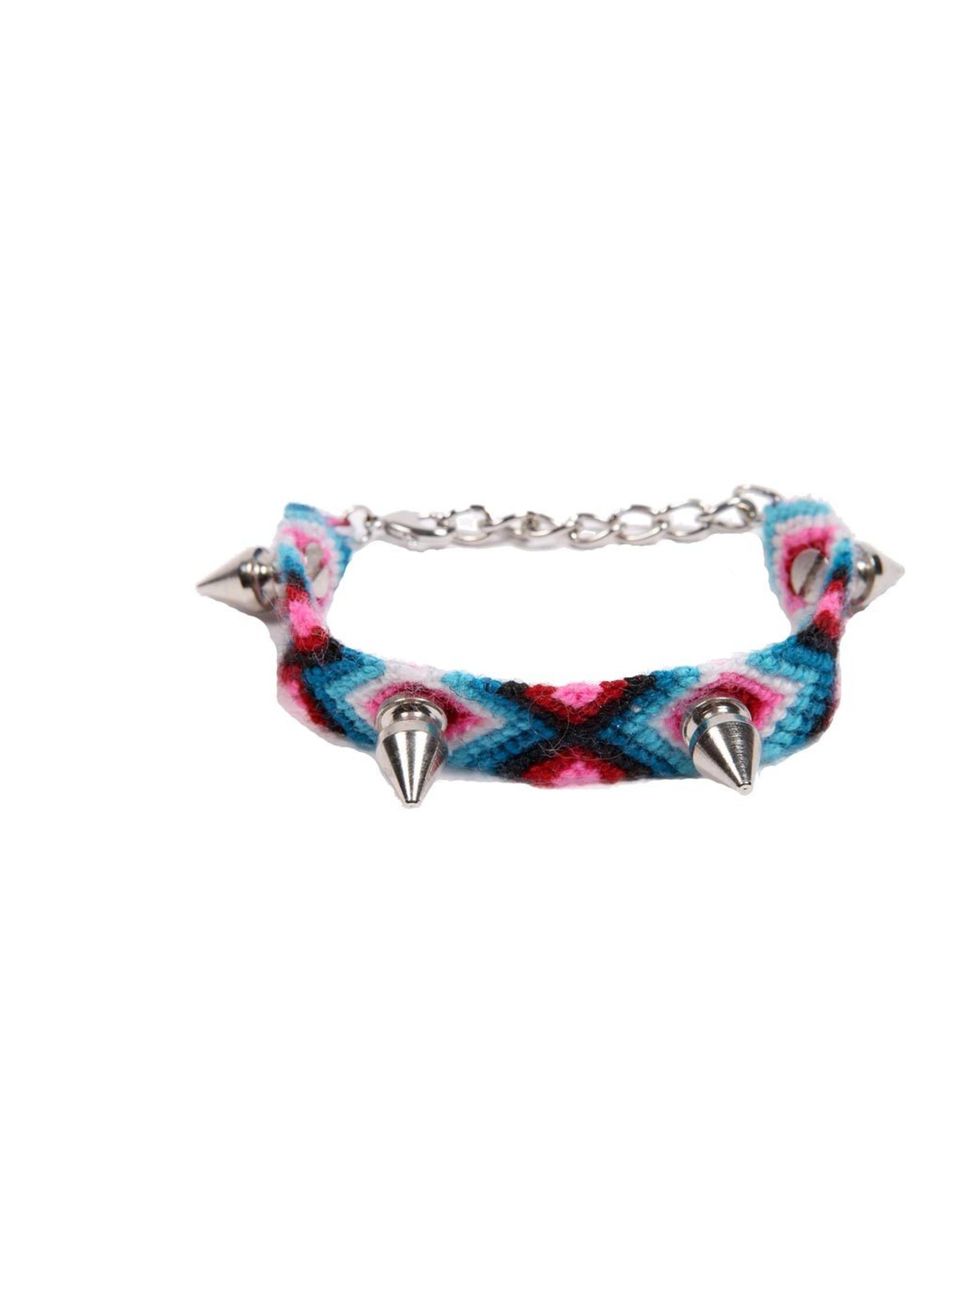 <p>You neednt spend a fortune refreshing your look - opt for directional accessories and jewellery just like this spiked friendship bracelet Urban Outfitters bracelet, £18</p><p><a href="http://shopping.elleuk.com/browse?fts=urban+outfitters+silver+spik